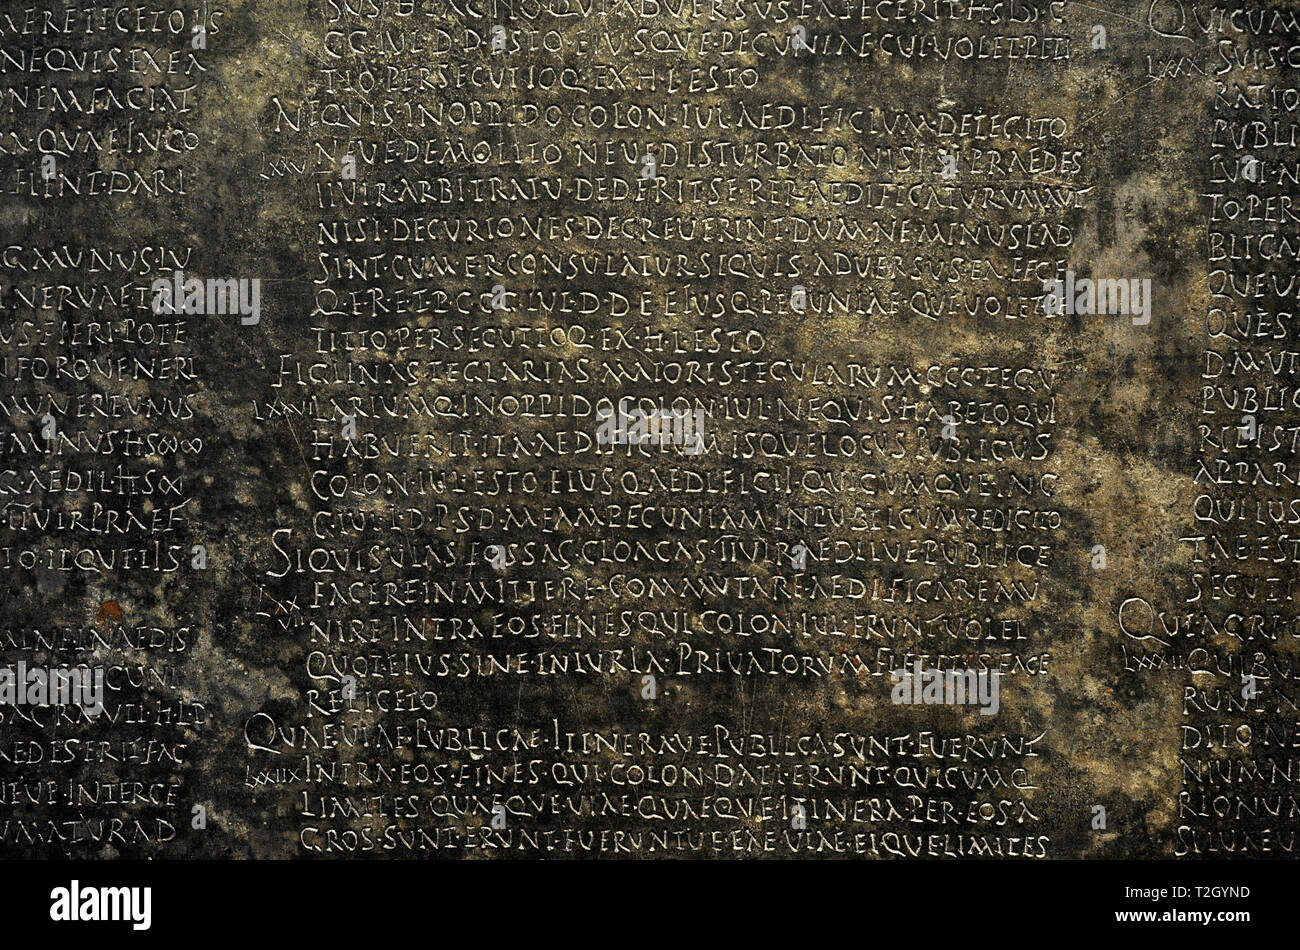 Lex Coloniae Genitiuae Iuliae. Detail. Municipal Law of the ancient Urso (Osuna, province of Seville, Andalusia, Spain) promulgated in 44 BC. Published in bronze tablets between 20 and 24 AD. Second tablet. Chapters 70 to 82. Explains the obligation of augurs and pontifices to reside in the colony, appointment of legates, prohibition of gifts to avoid abuses, jurisdiction of aediles, procedure of popular initiatives and judicial means for colonist to demand the fulfillment of civic obligations. National Archaeological Museum Madrid. Spain. Stock Photo